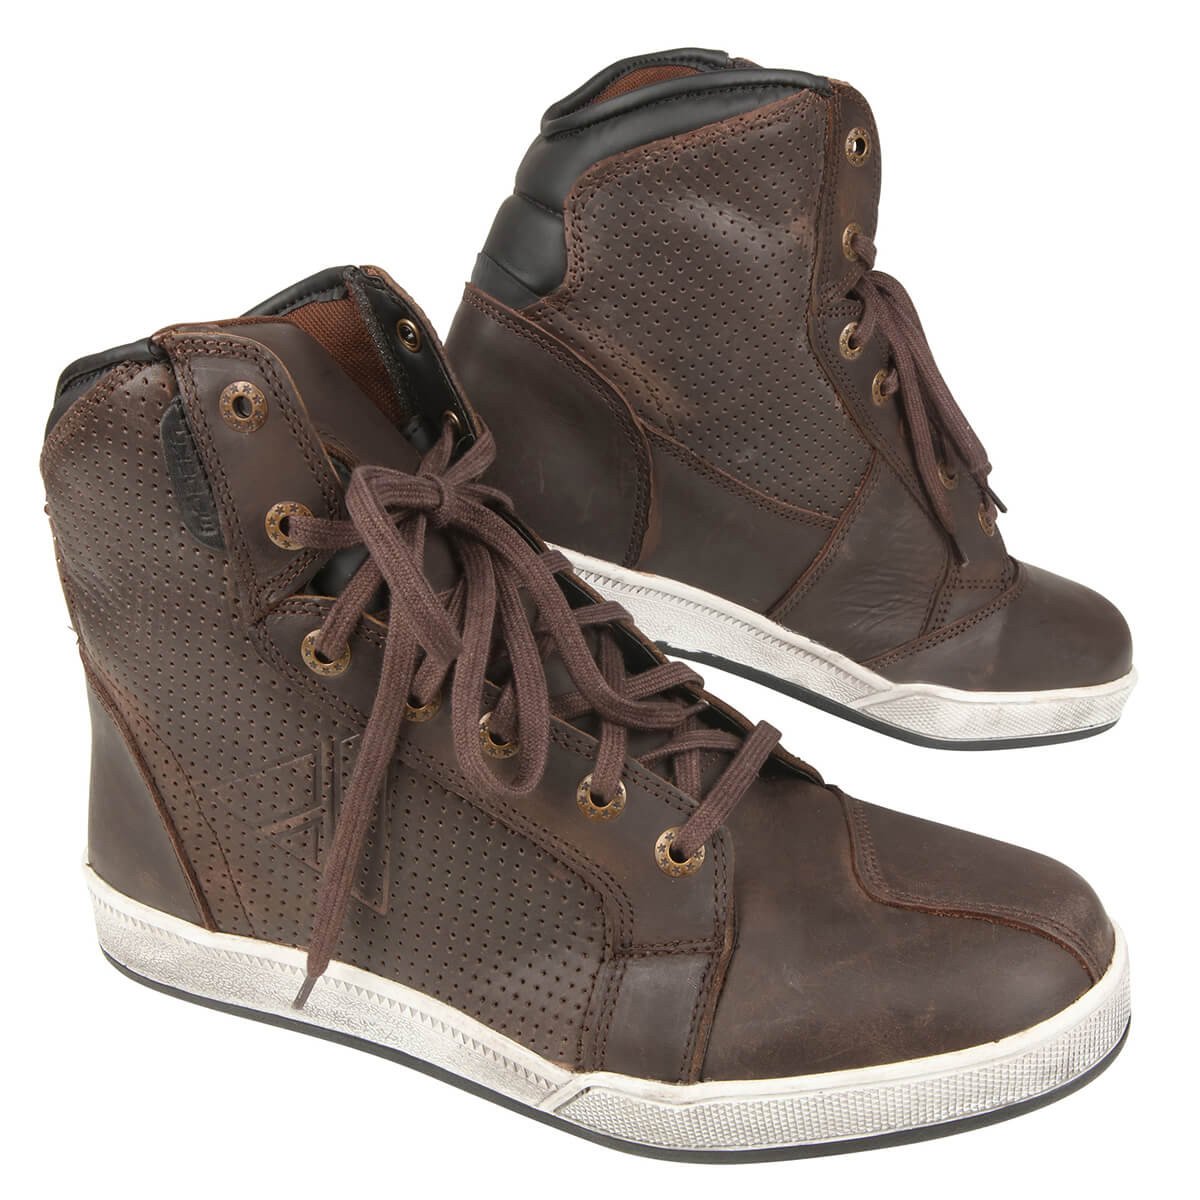 Image of Modeka Midtown Sneakers Brown Size 45 ID 4045765137987